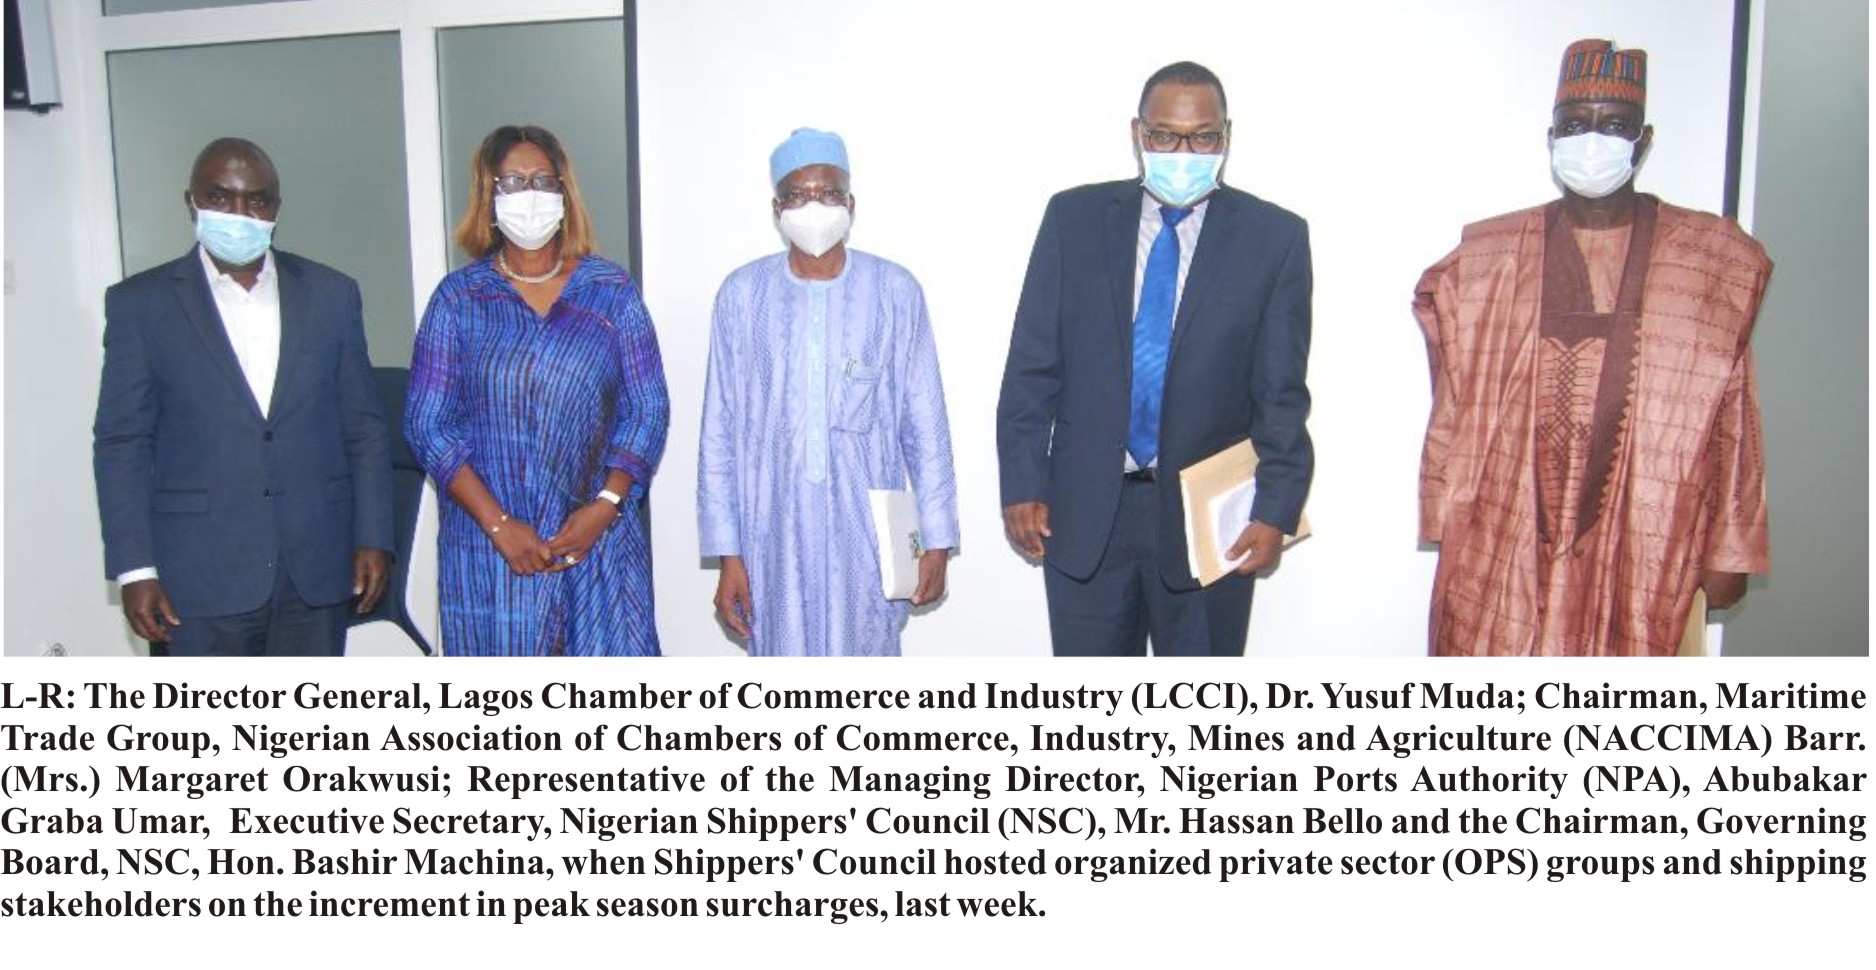 400% Global Shipping Hike: FG To Rejig Policies, Expedite Private Investment In Ship Acquisition